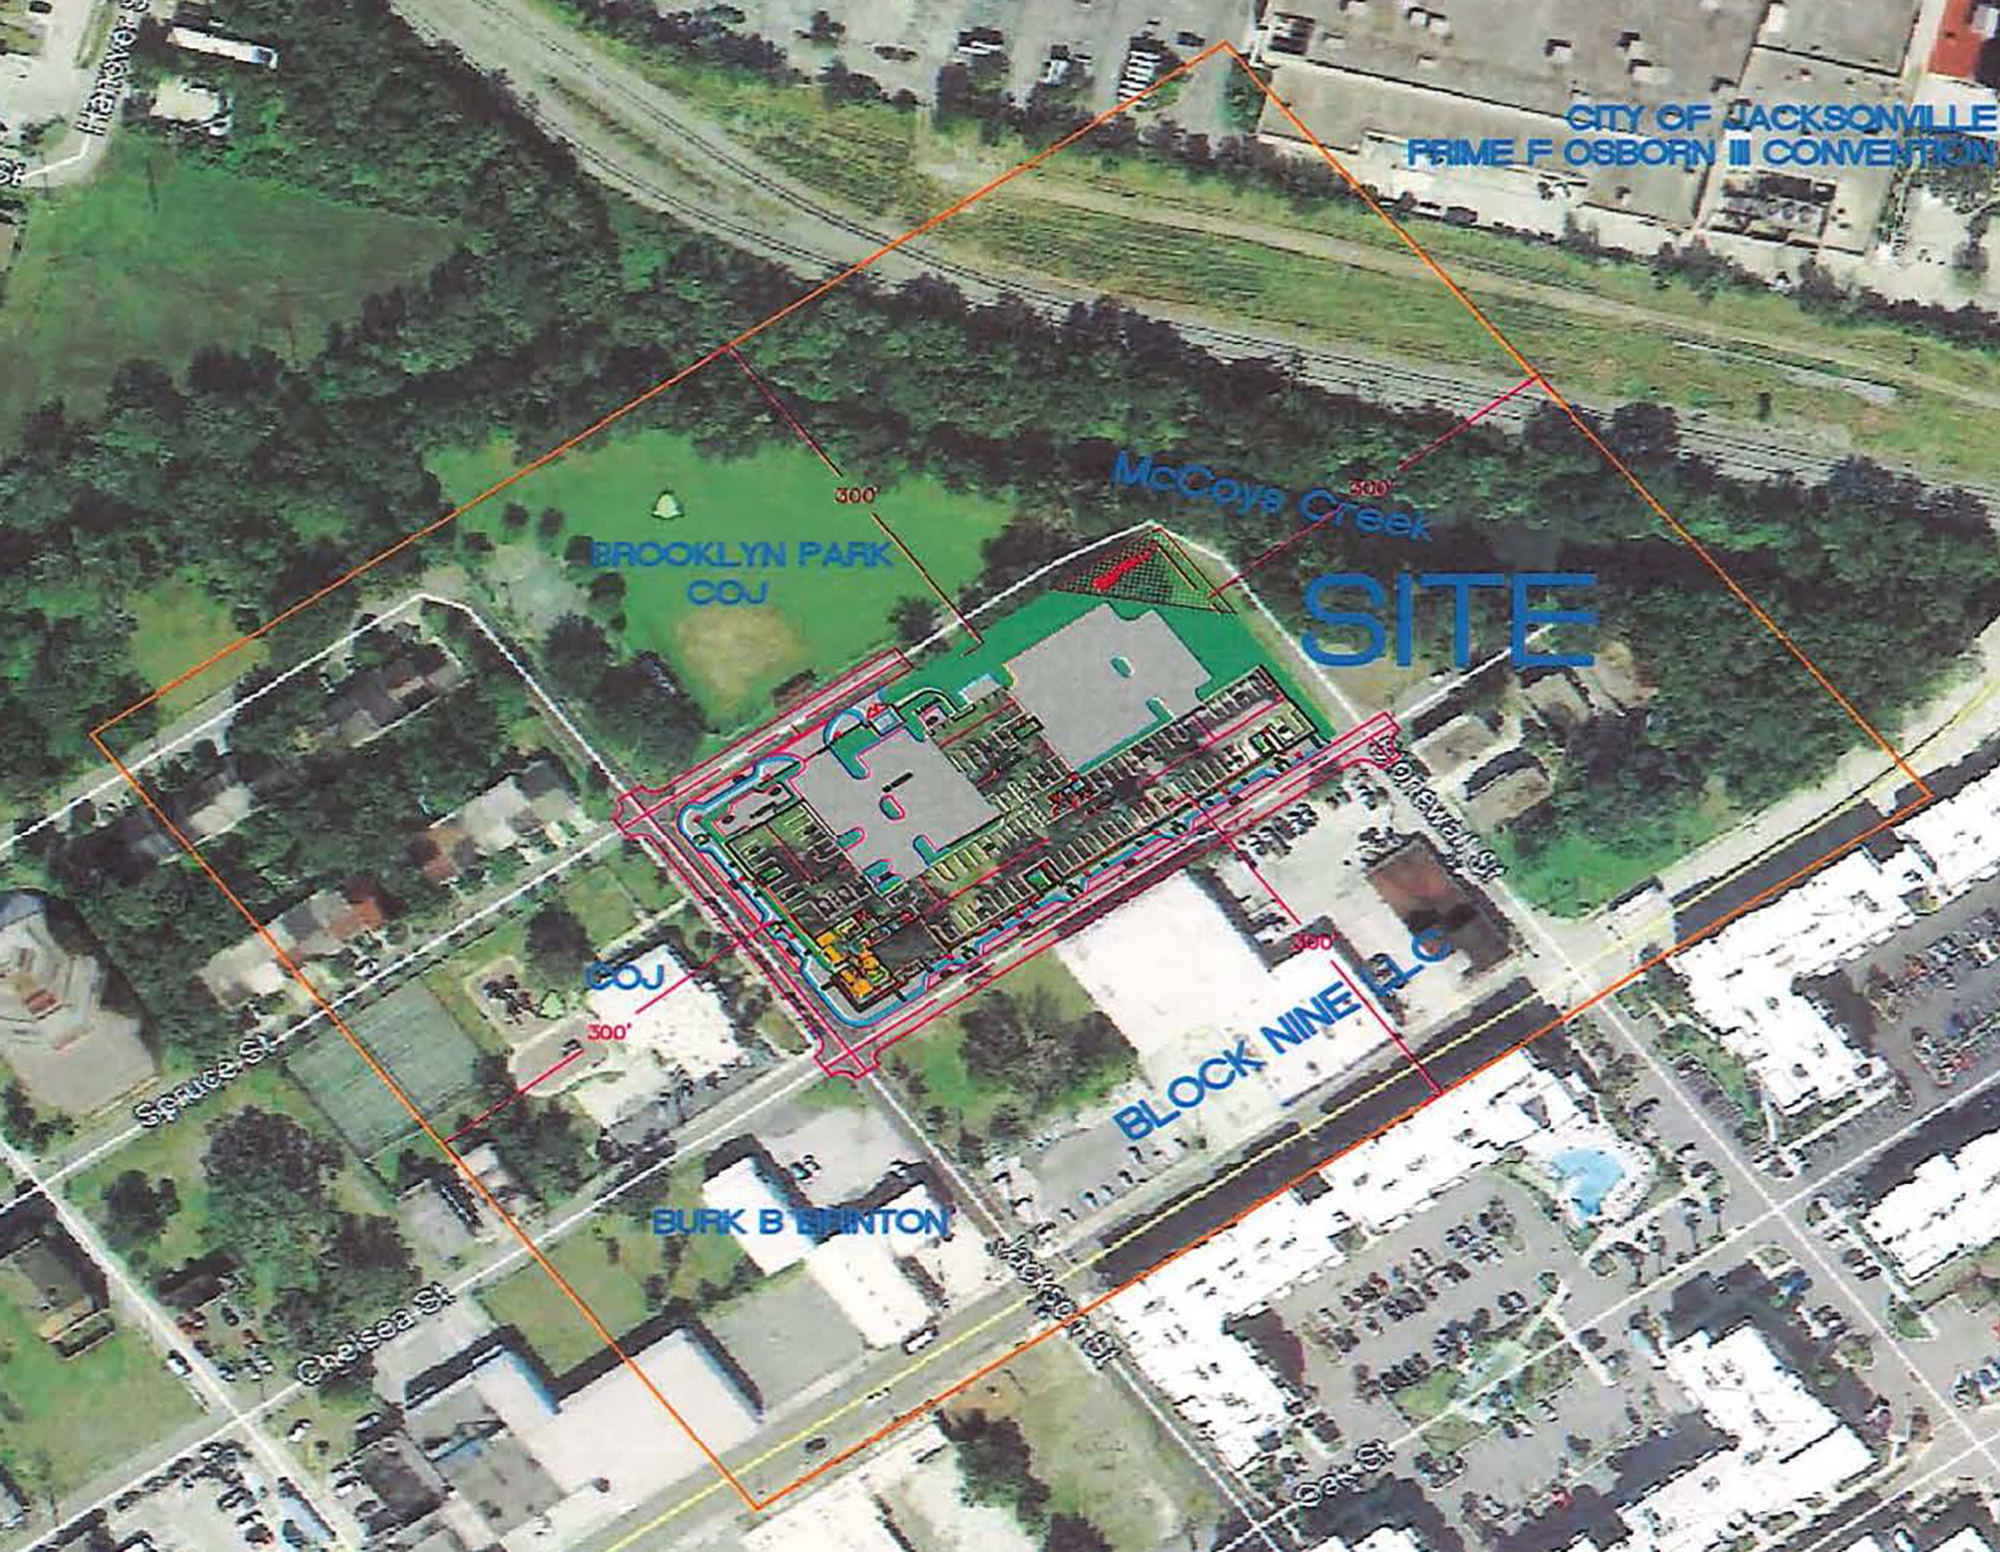 The Lofts at Brooklyn is outlined in red. The DDRB asked the developer for public parking near Brooklyn Park.